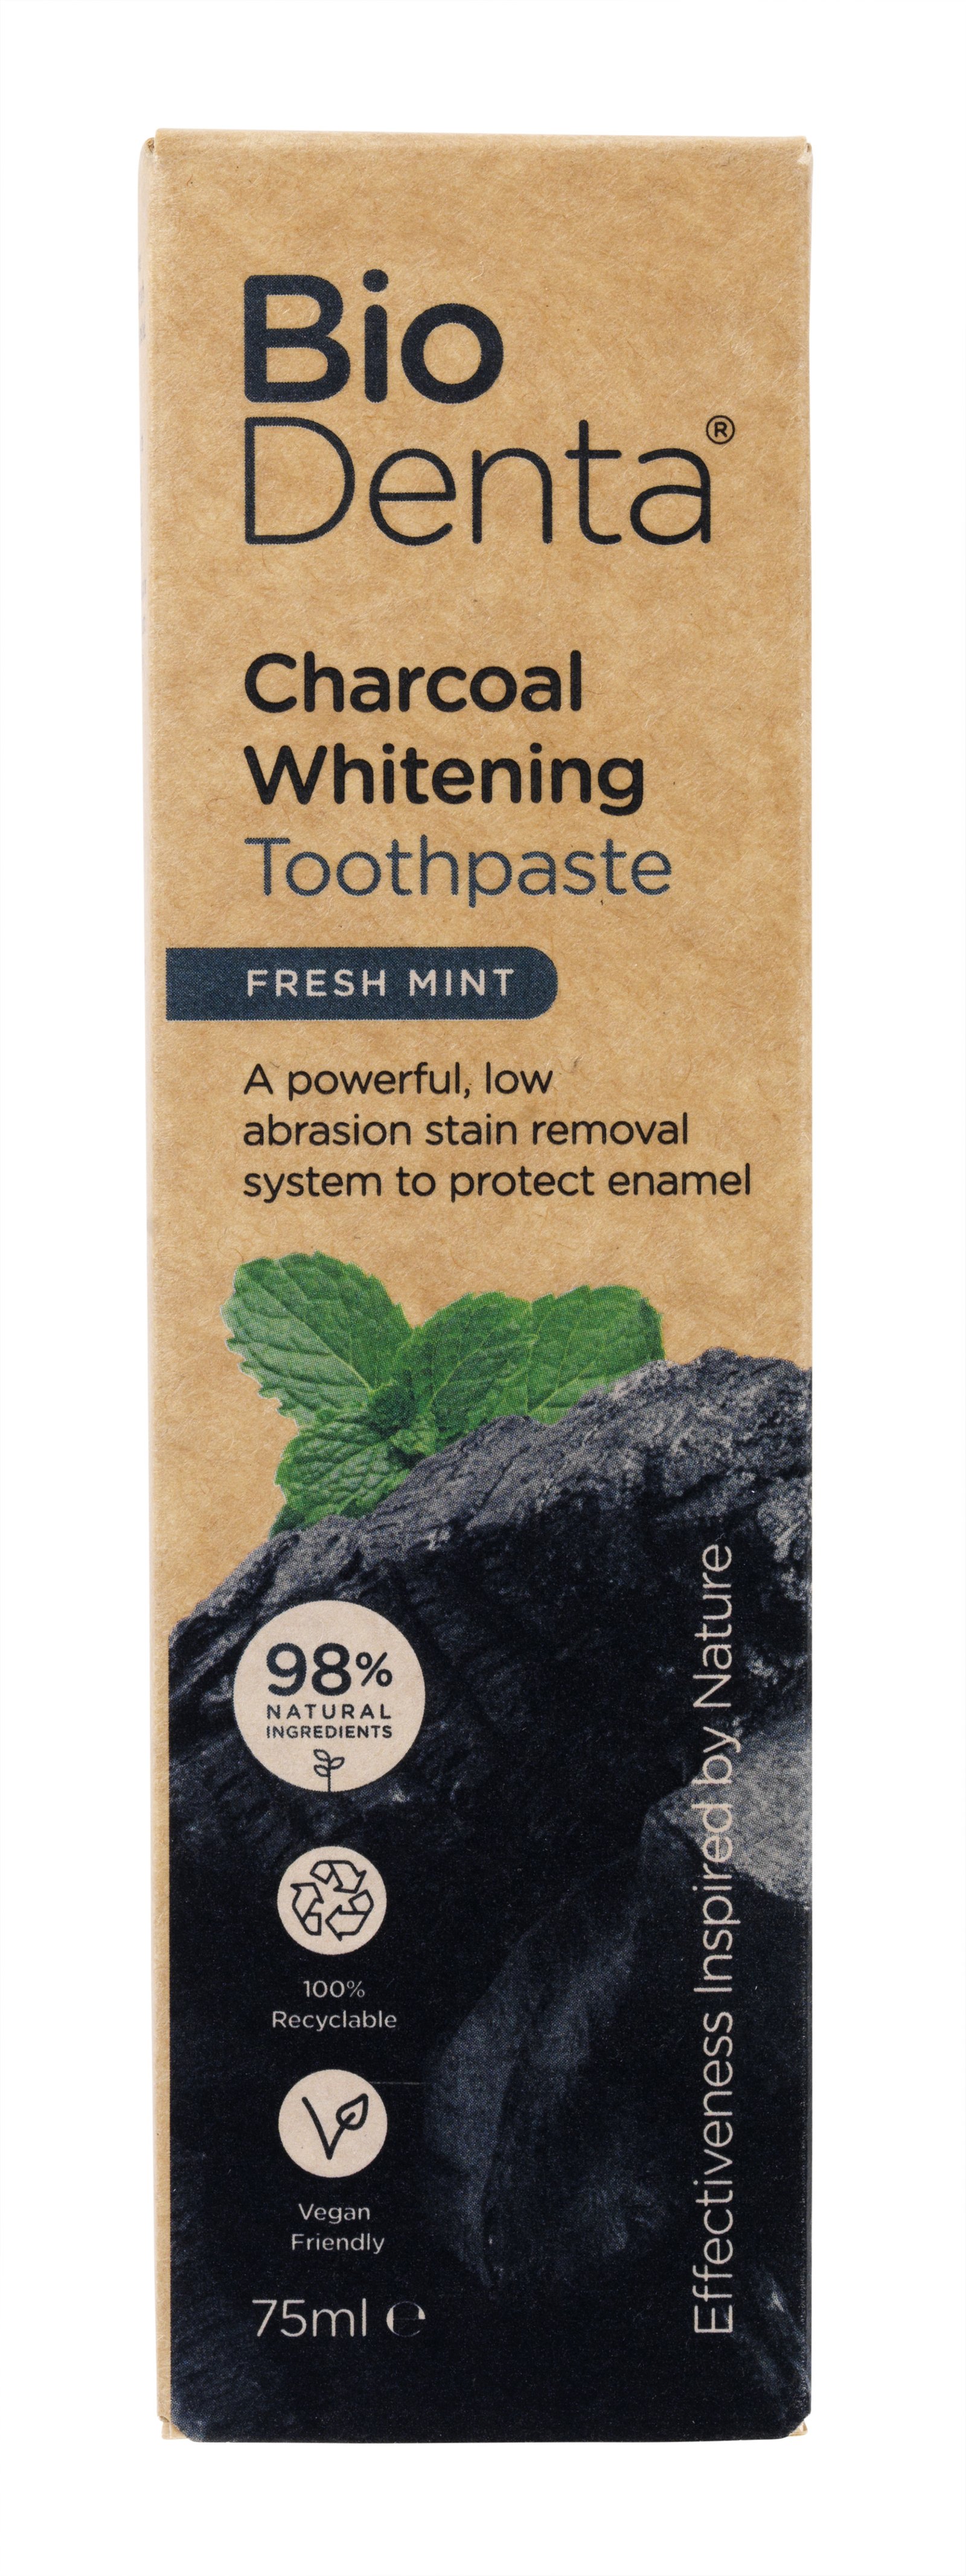 Beconfident BioDenta Charcoal Whitening Toothpaste Fresh Mint 75 ml